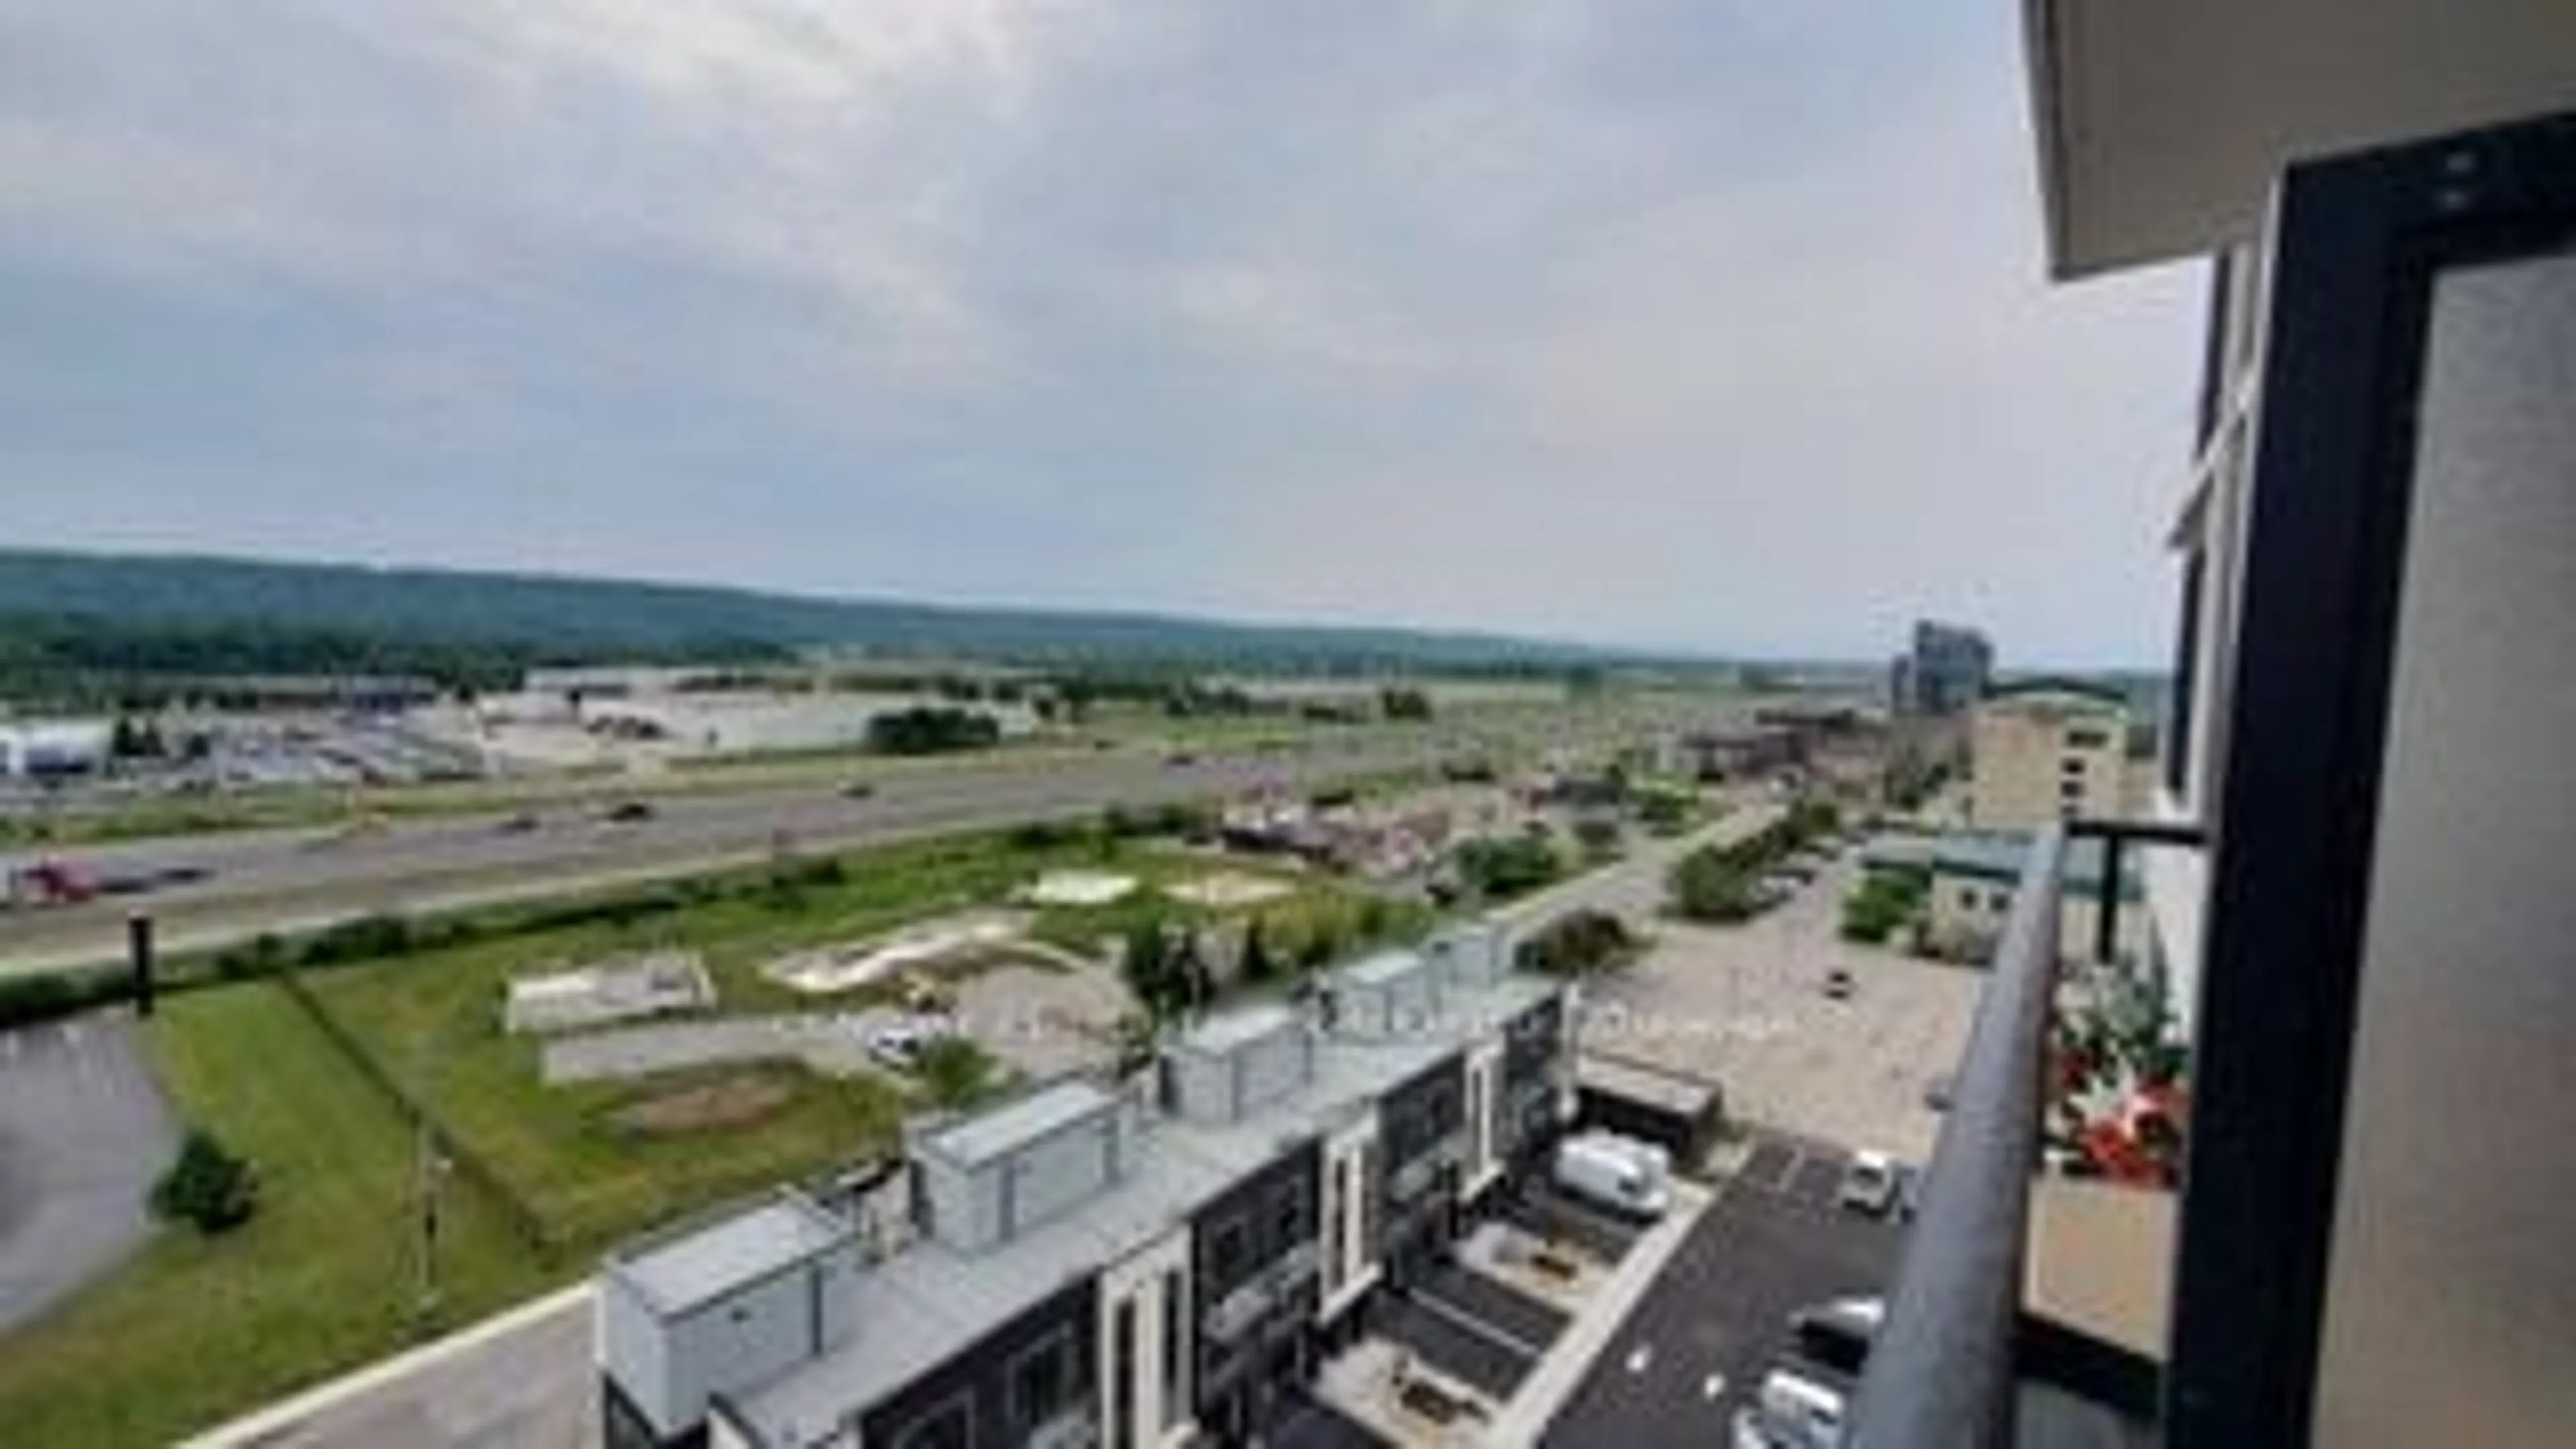 Lakeview for 385 Winston Rd #1012, Grimsby Ontario L3M 4E8